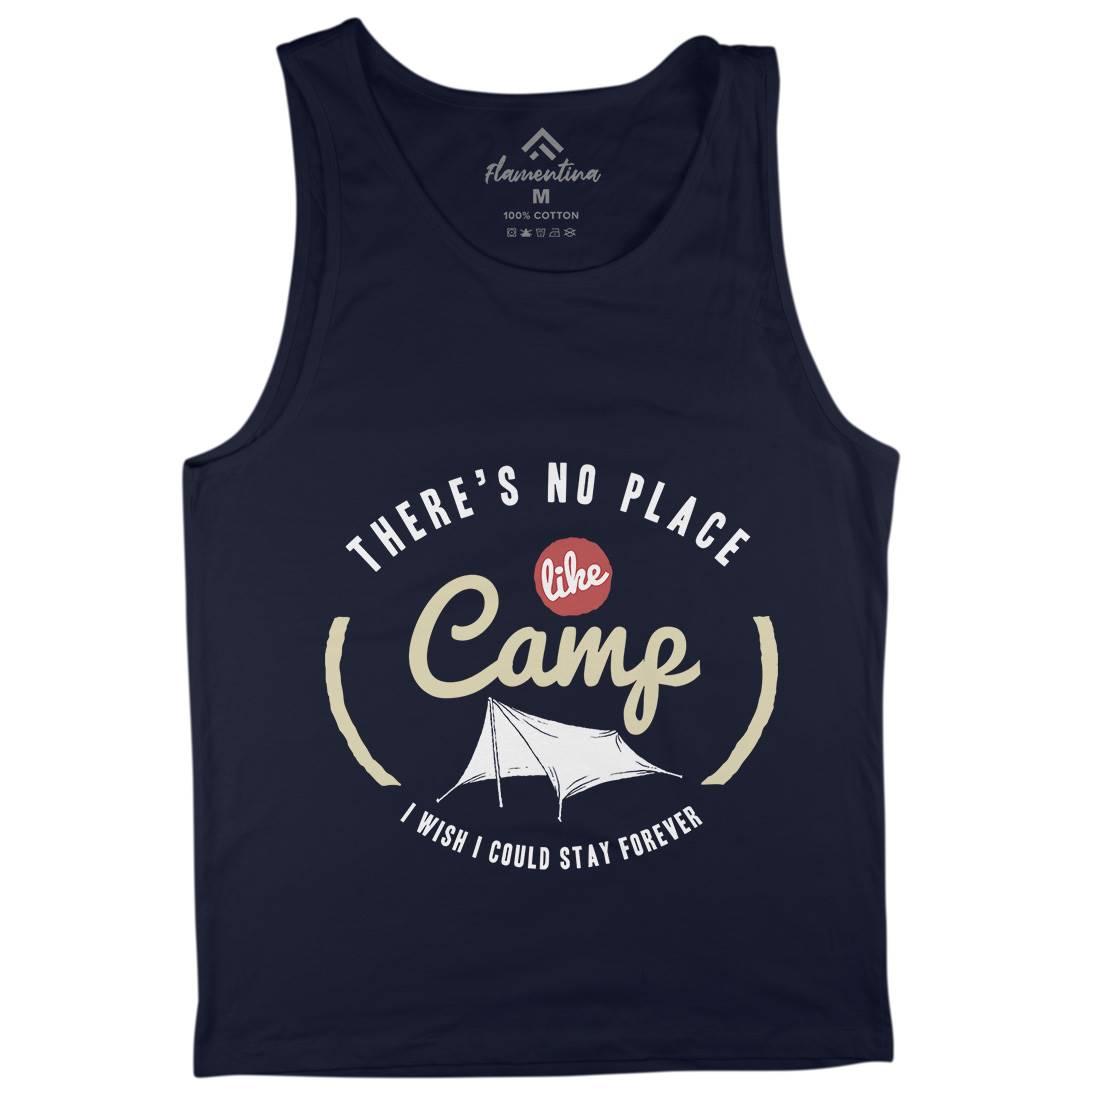 No Place Like Camp Mens Tank Top Vest Nature A353